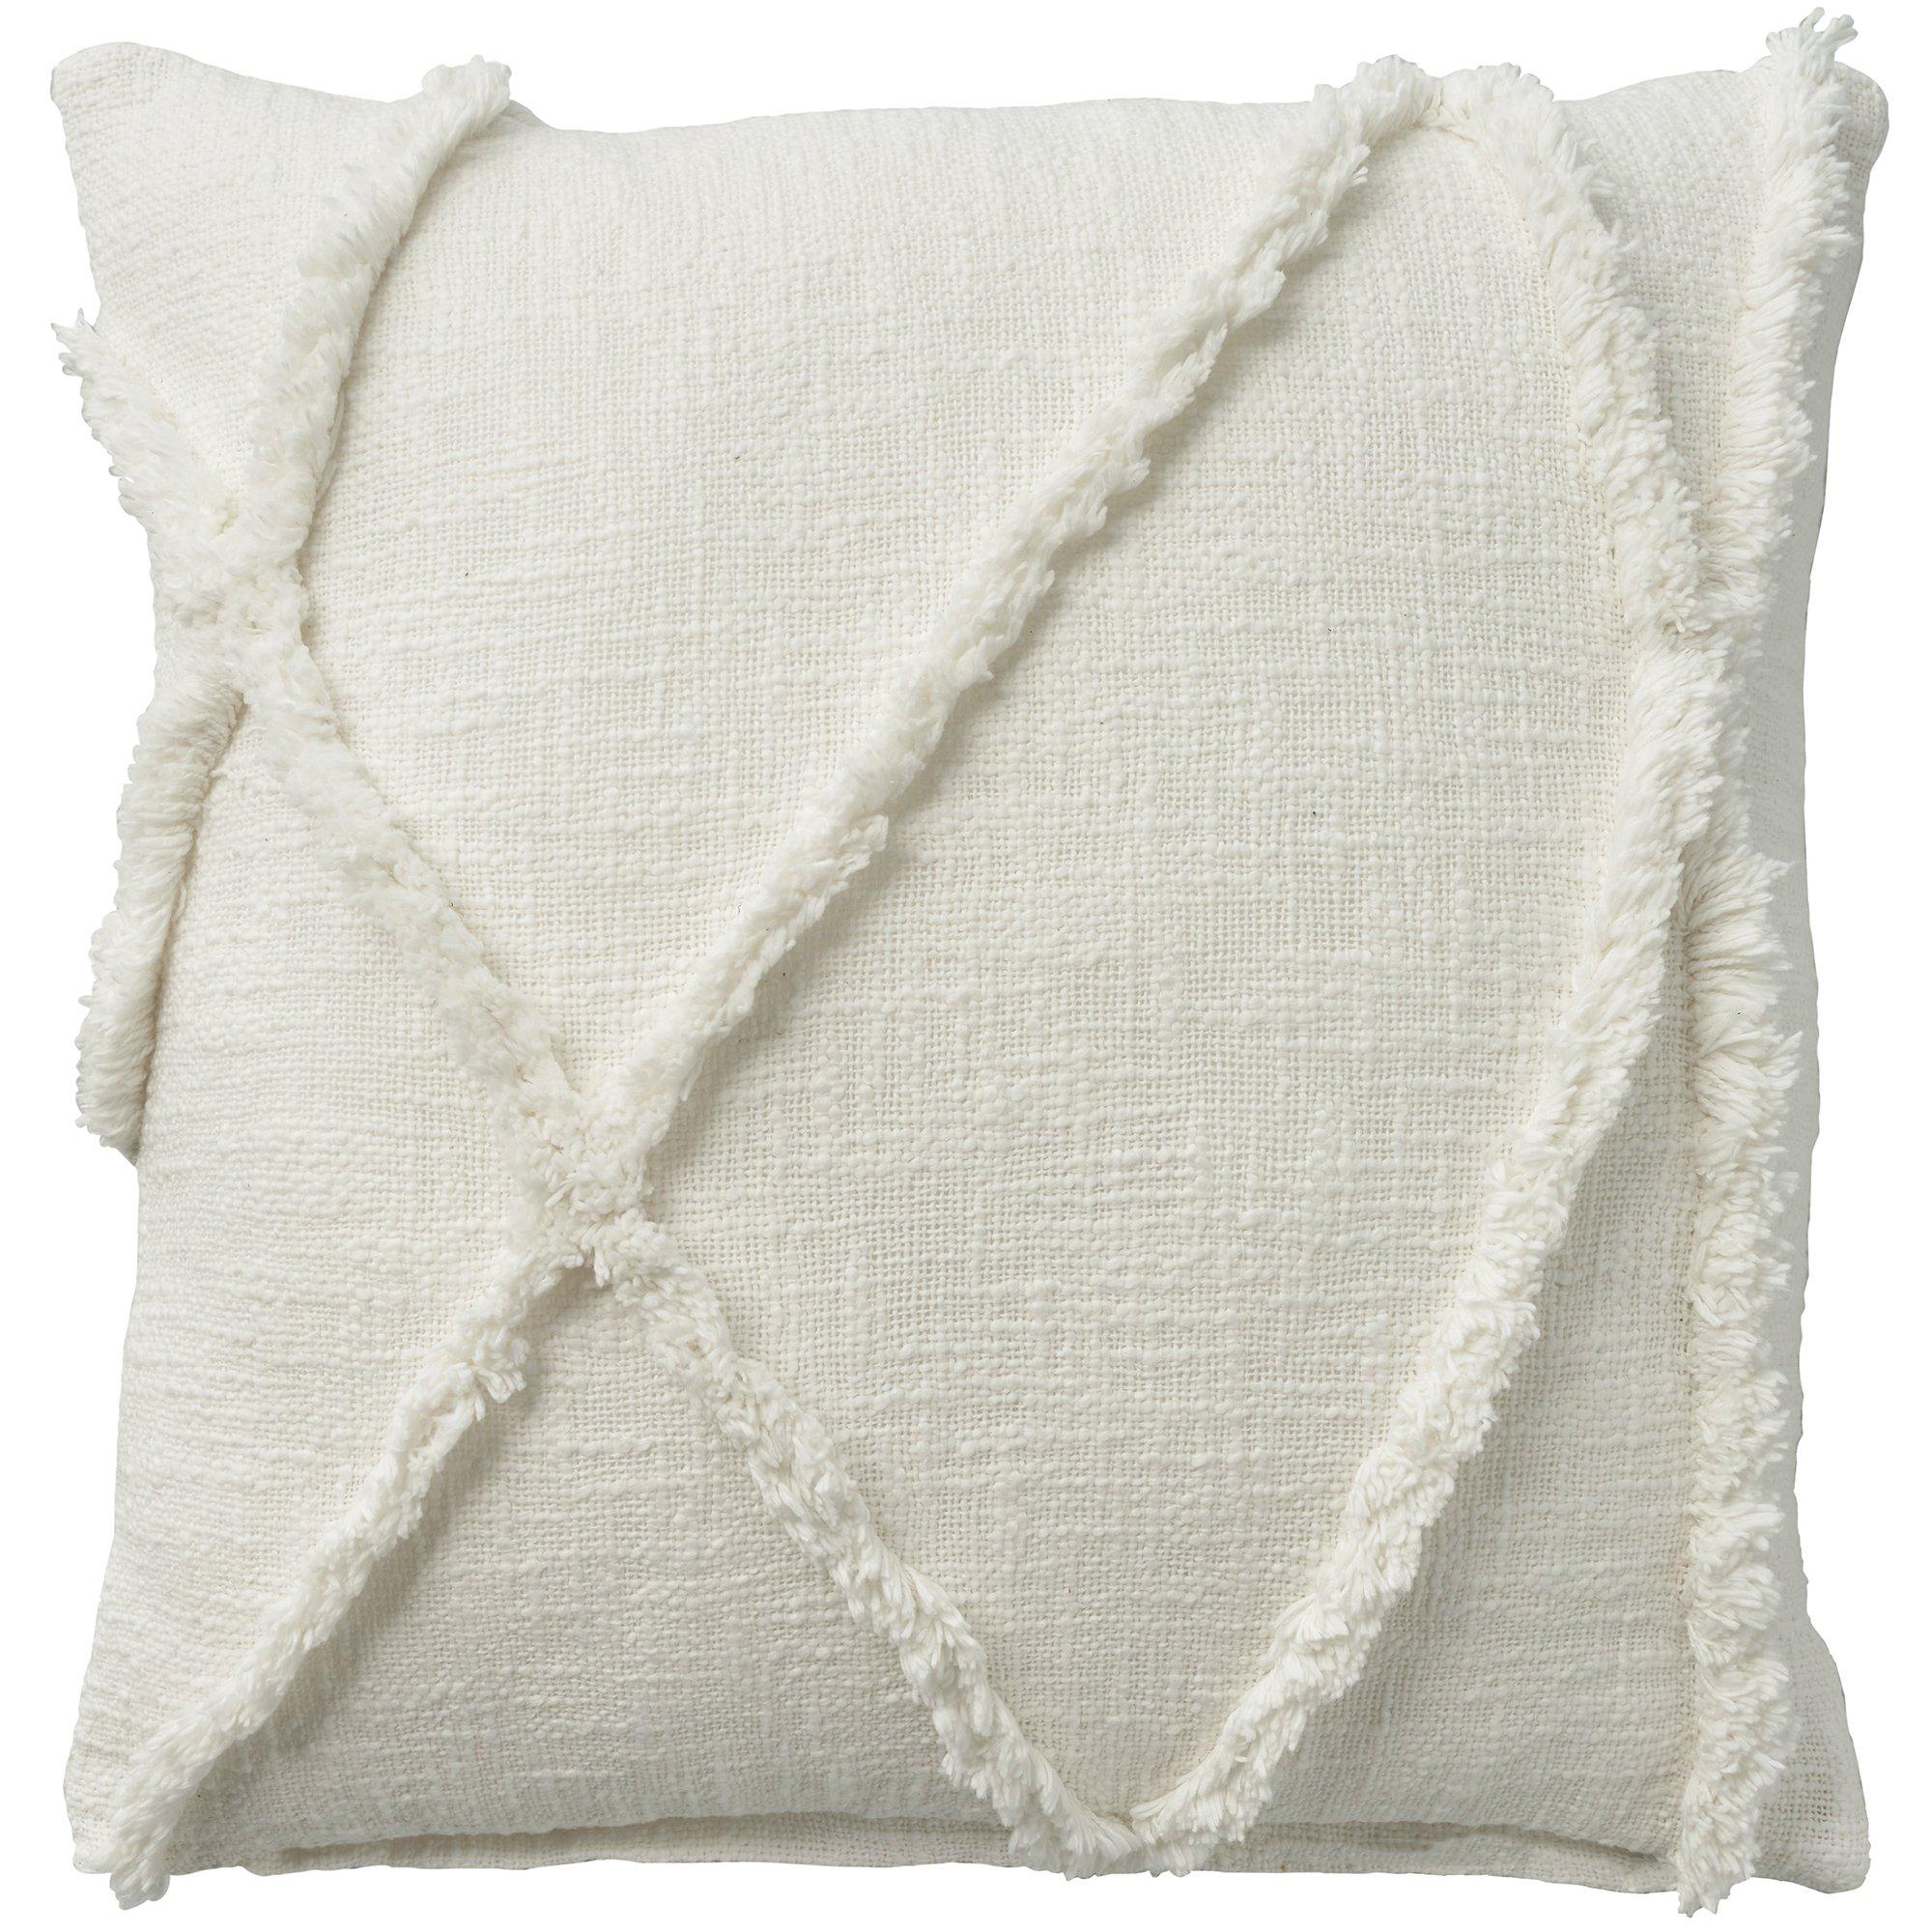 18x18 Embroidered Woven Decorative Pillow